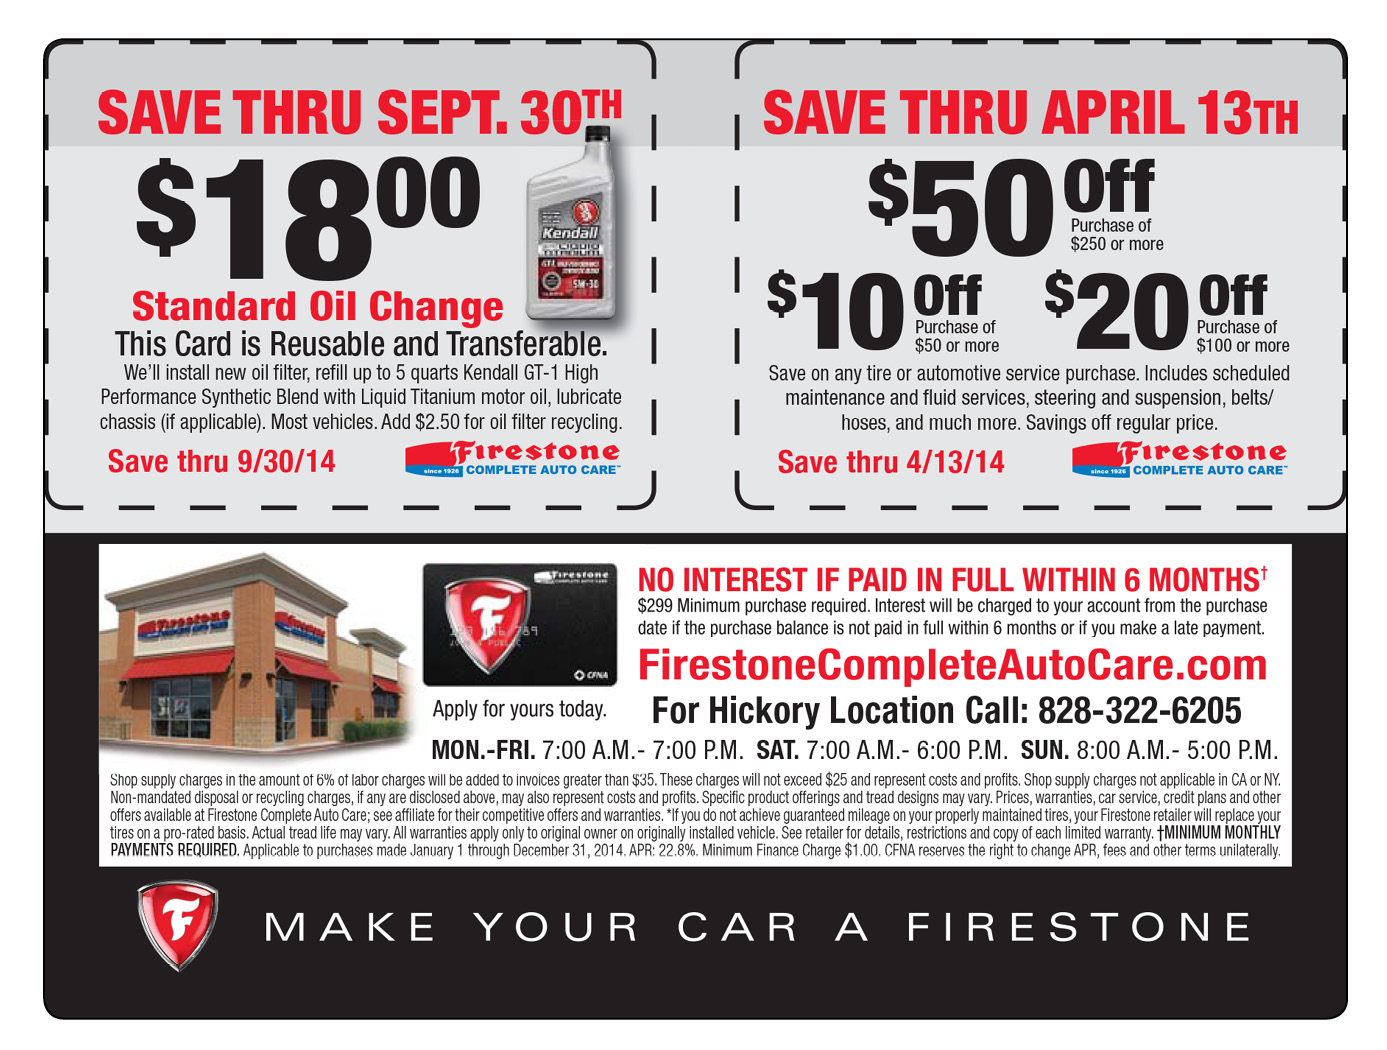 firestone-oil-change-coupon-september-2014-driverlayer-search-engine